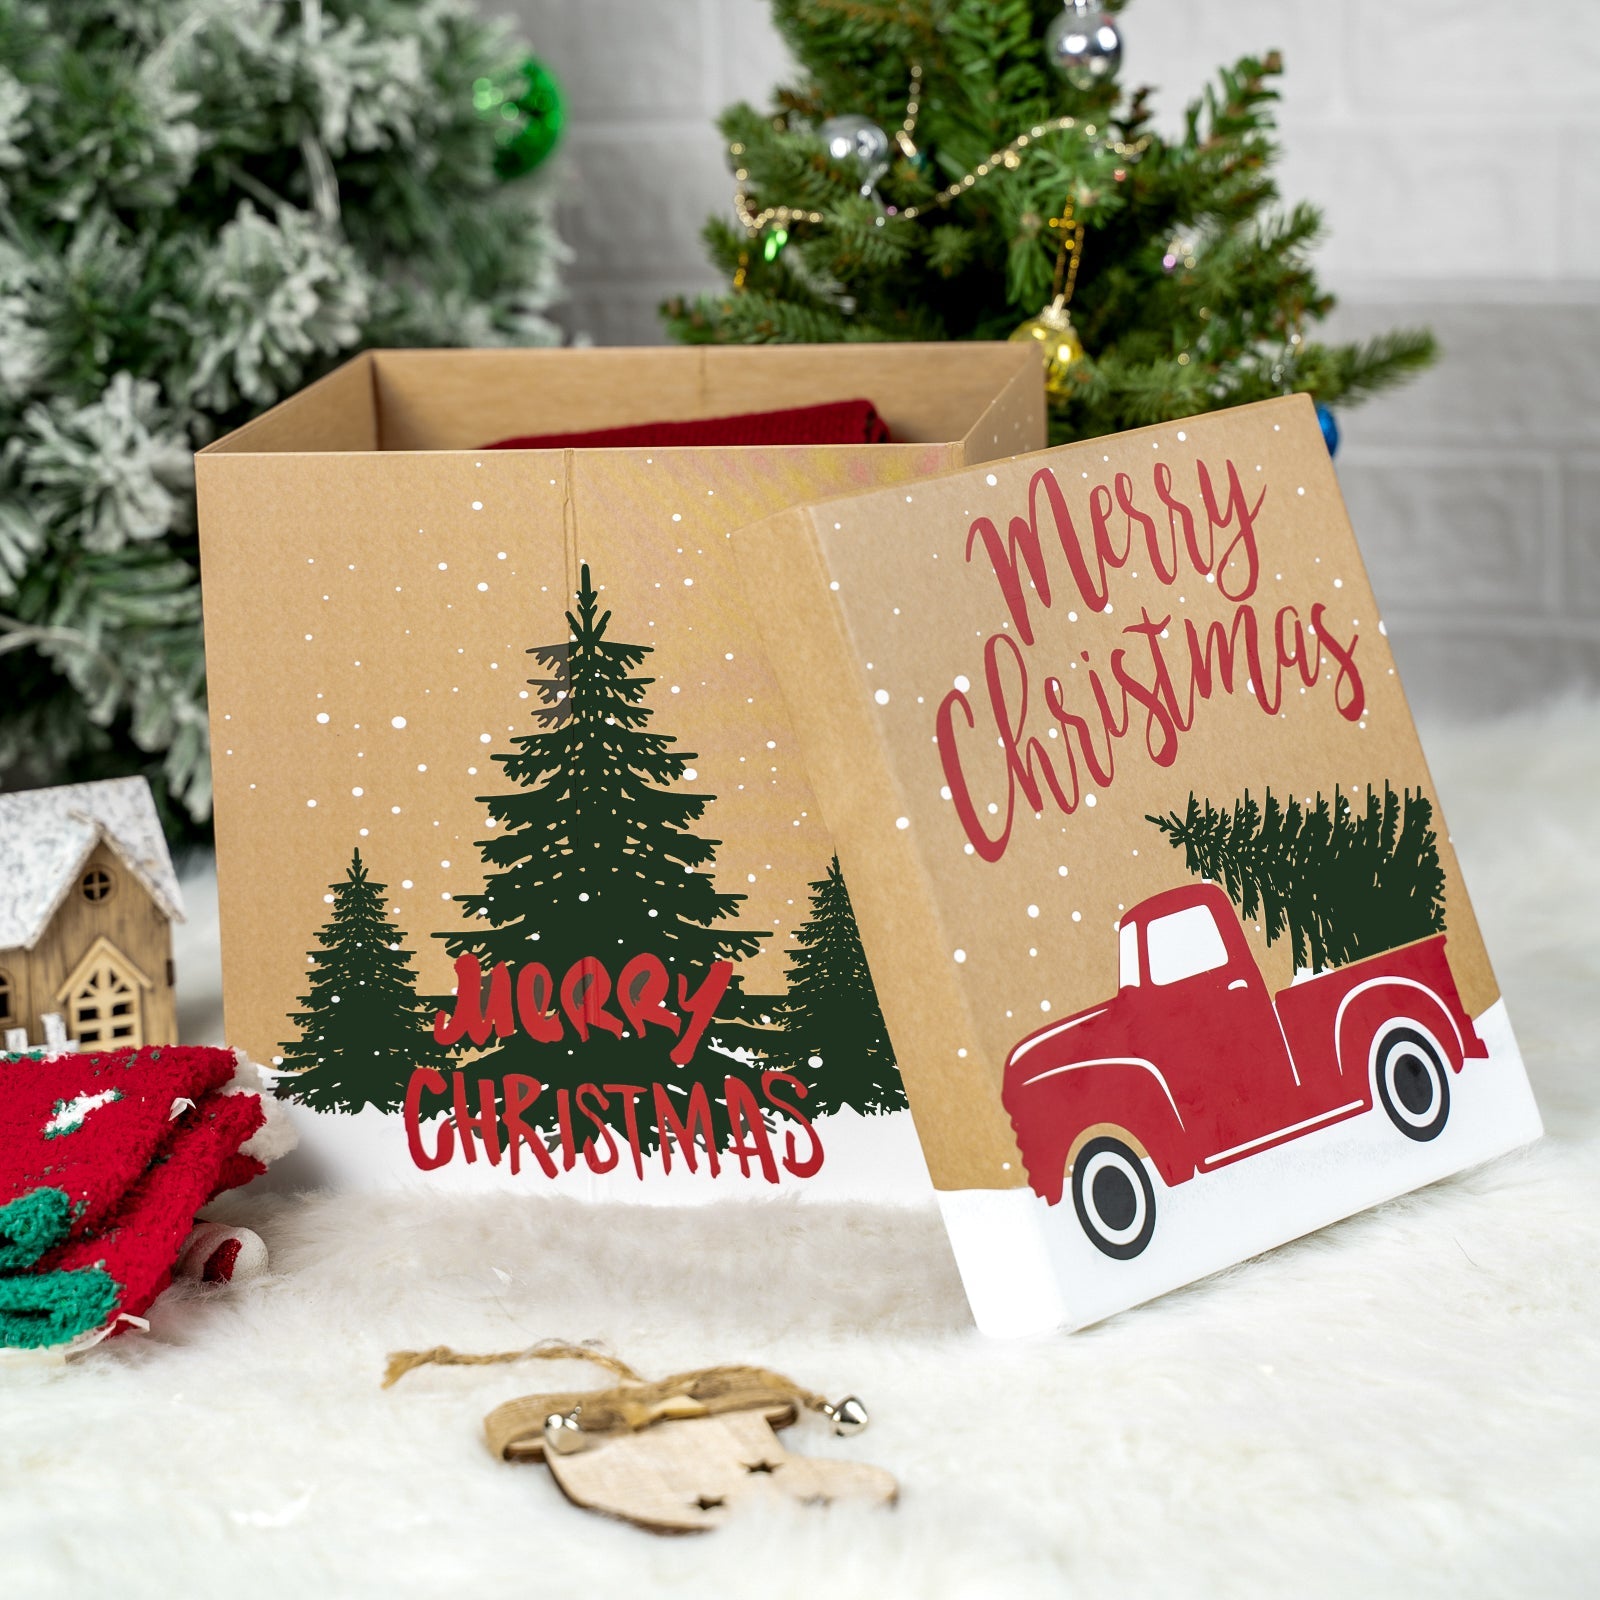 9 inch Square Christmas Gift Box with Lid - Tree Farm